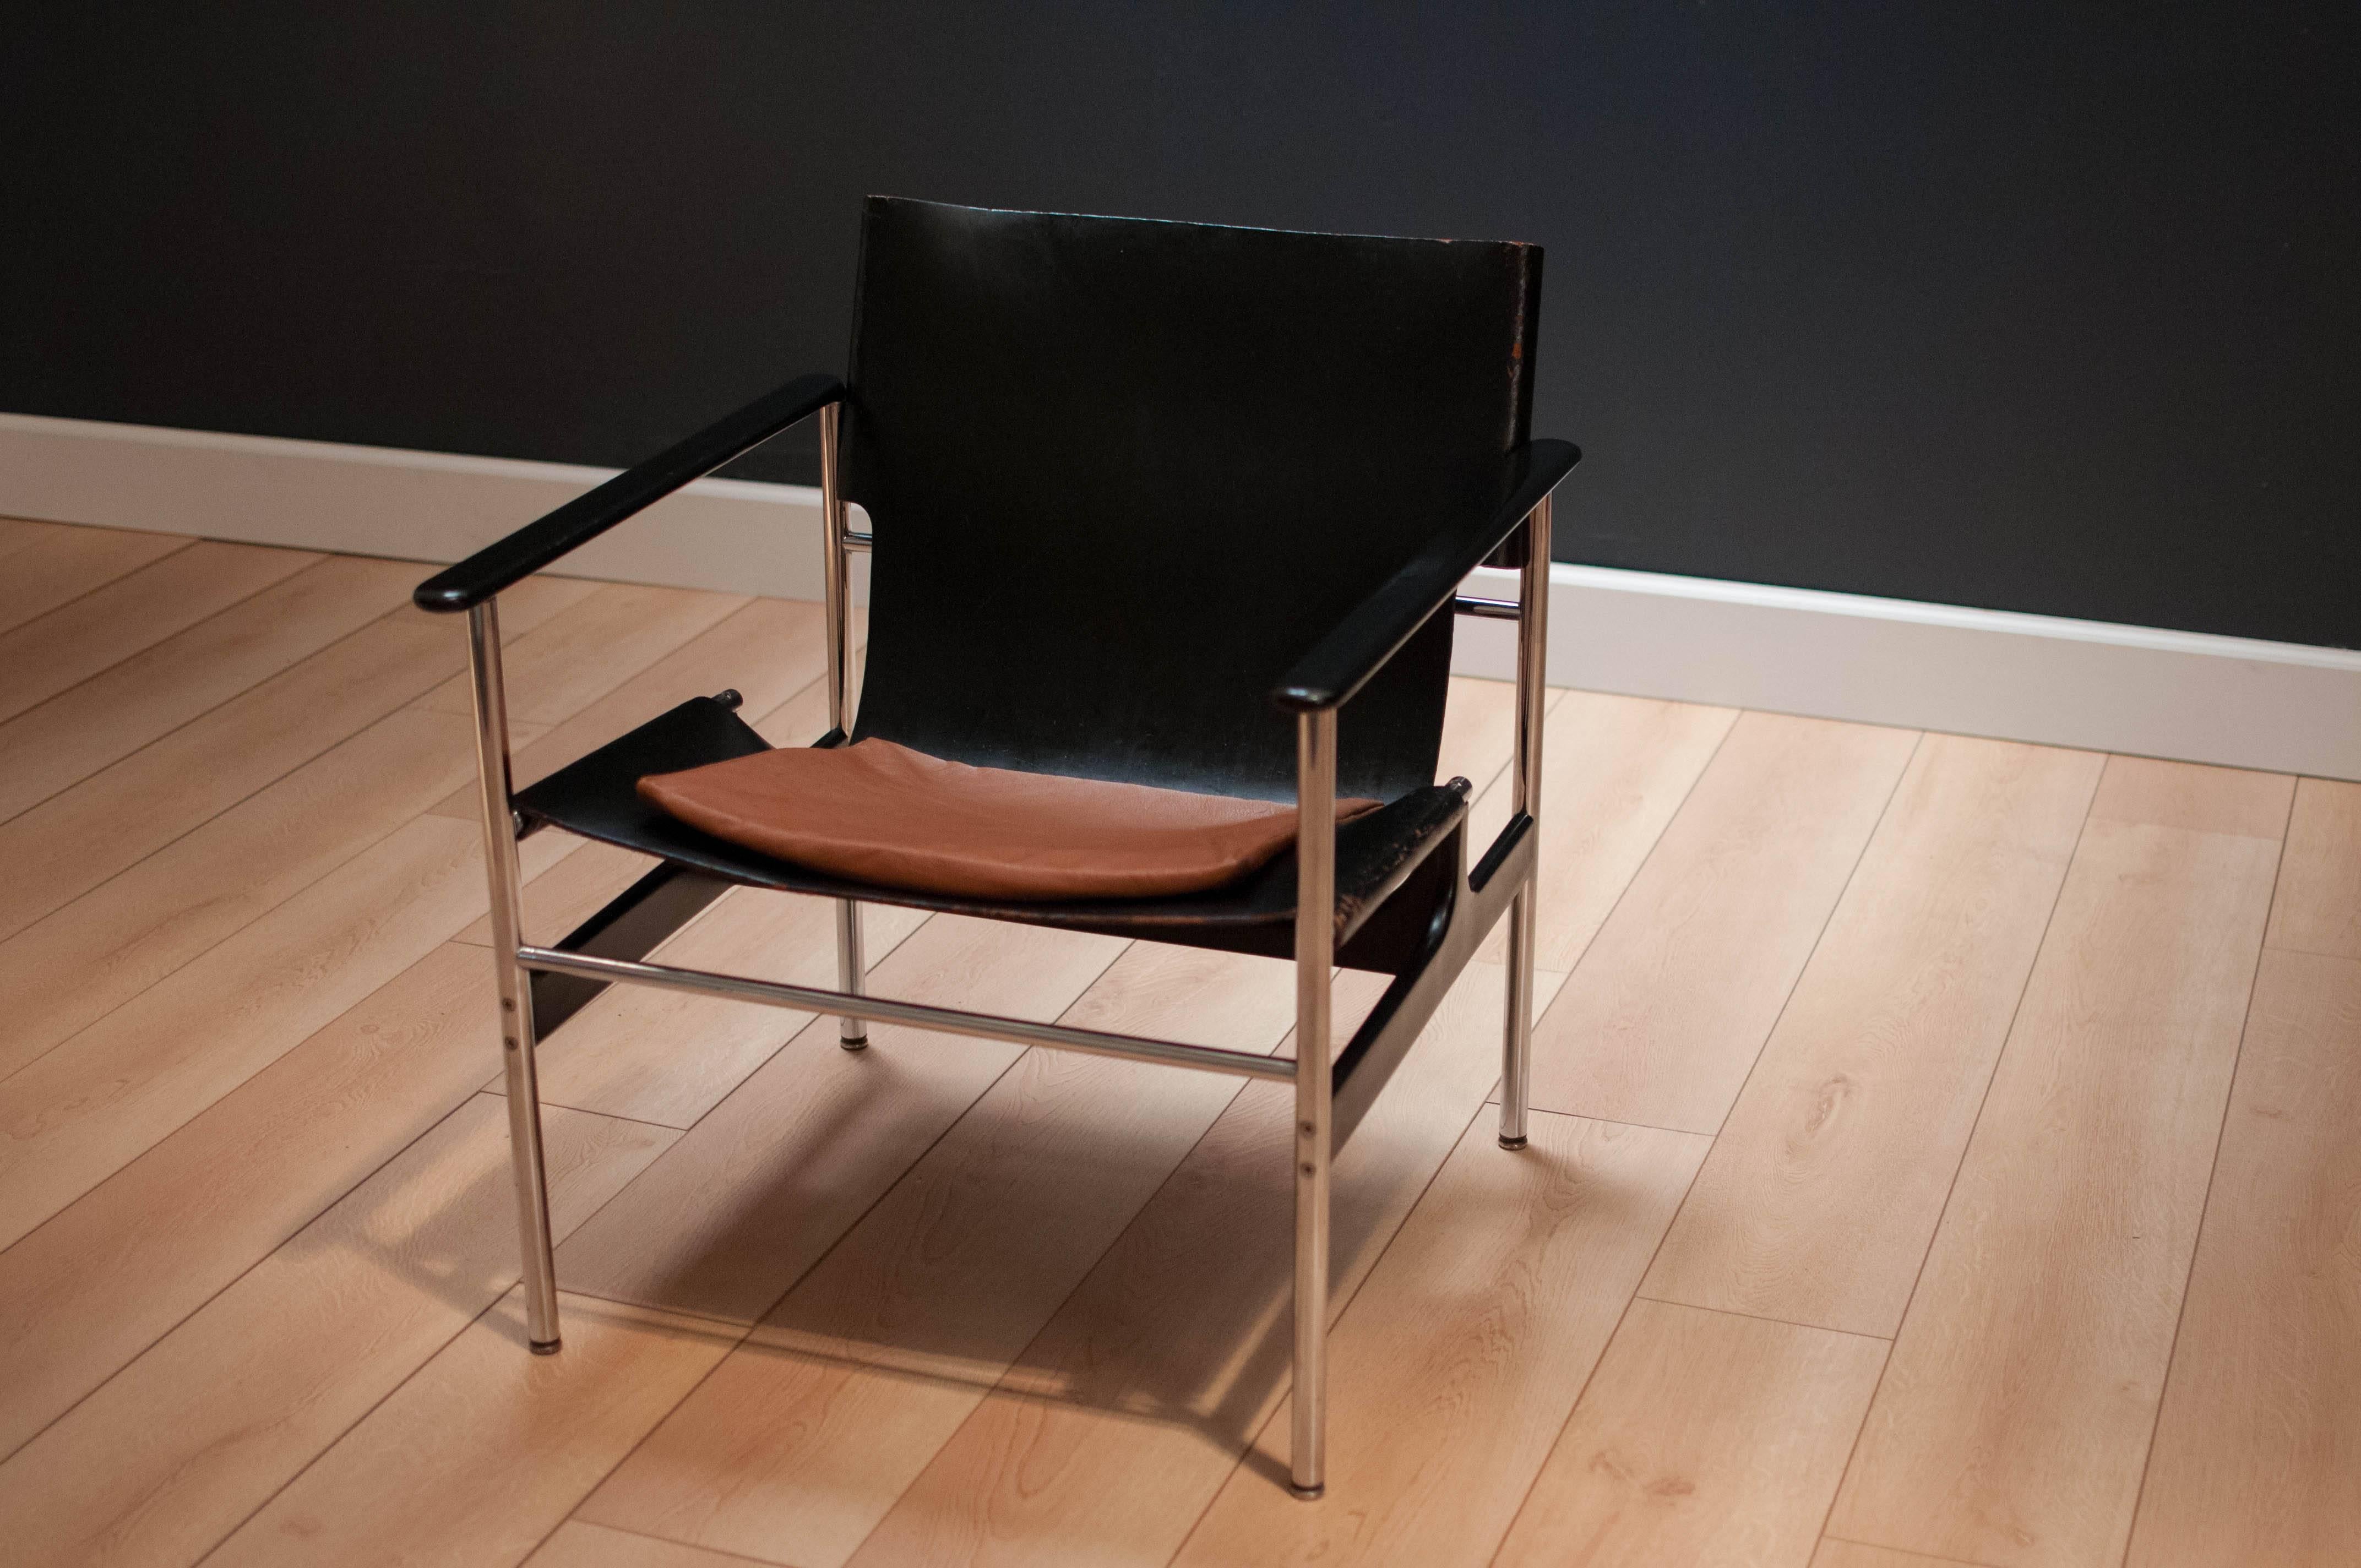 Vintage Knoll armchair 657 in cast aluminium and chrome finish. This iconic piece is designed by Charles Pollack and displays aged black leather with a tan leather cushion.

